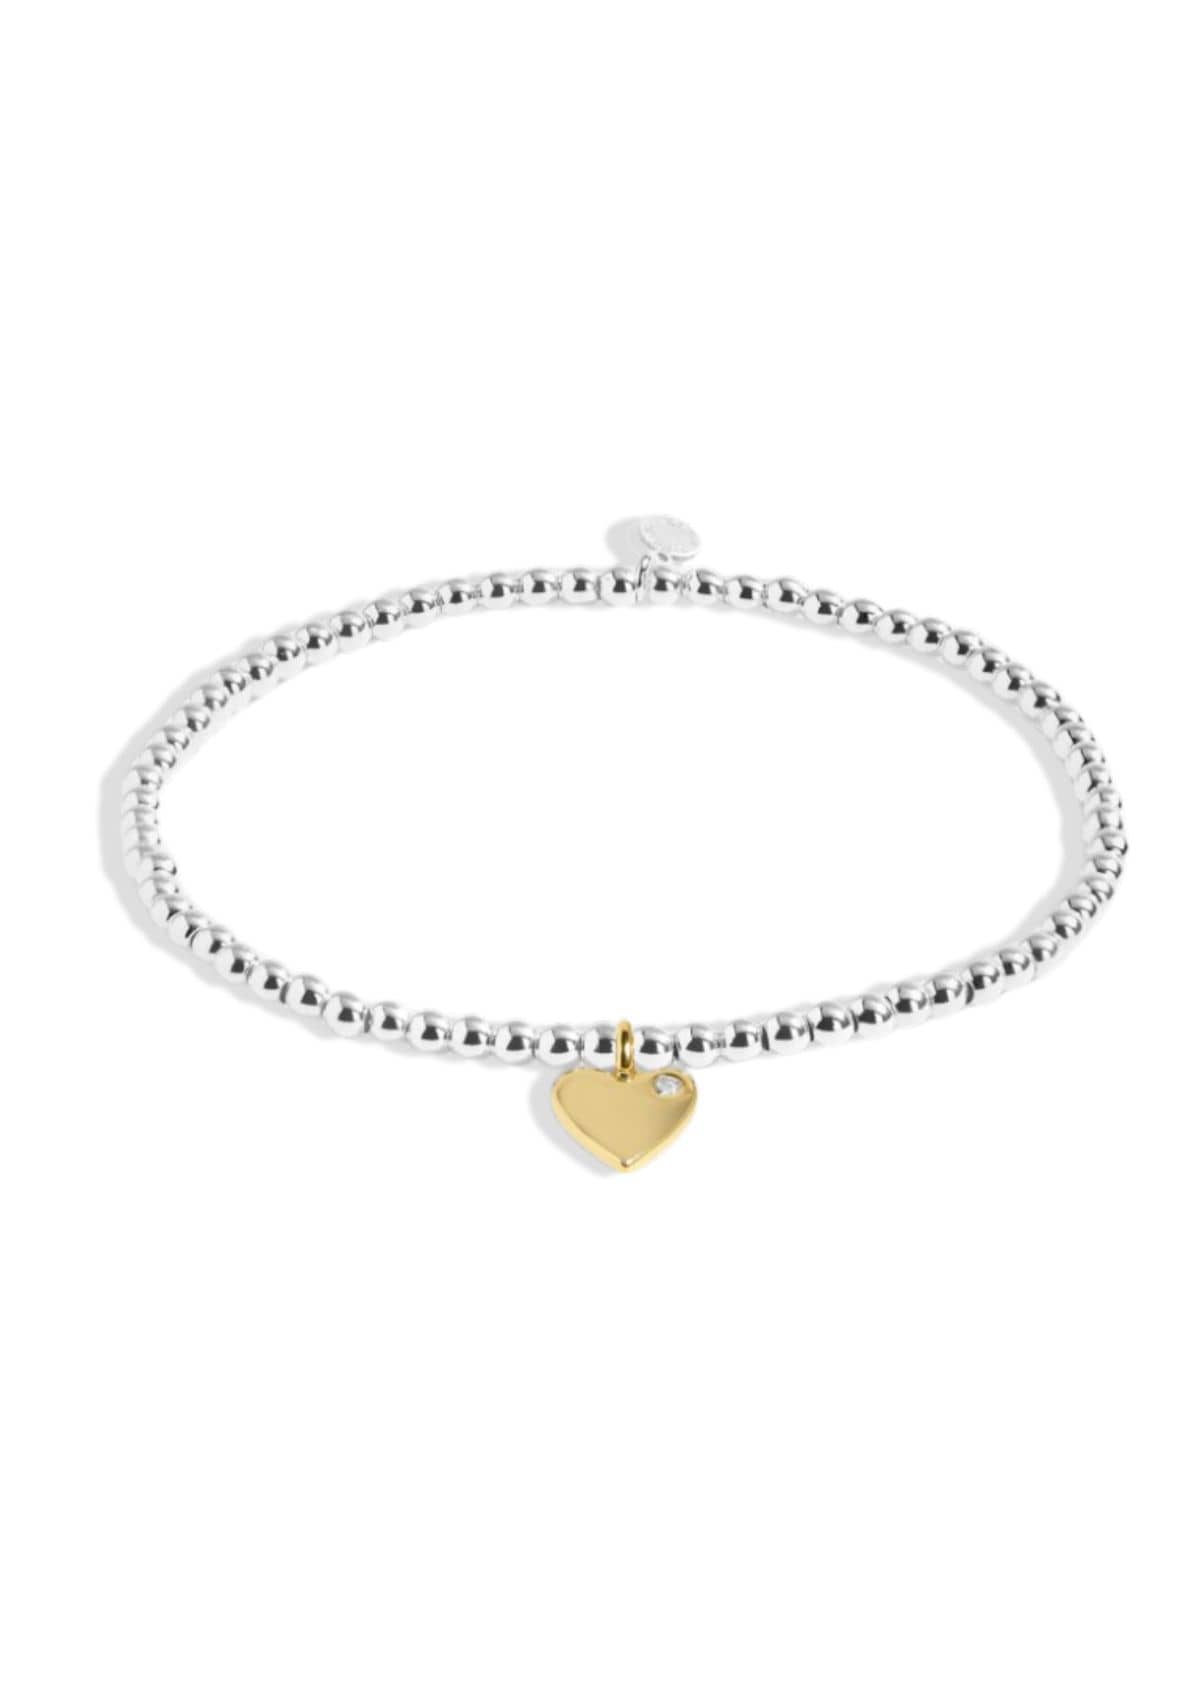 "Will You Be My Bridesmaid" Silver and Gold Bracelet -A Littles & CO- Ruby Jane-